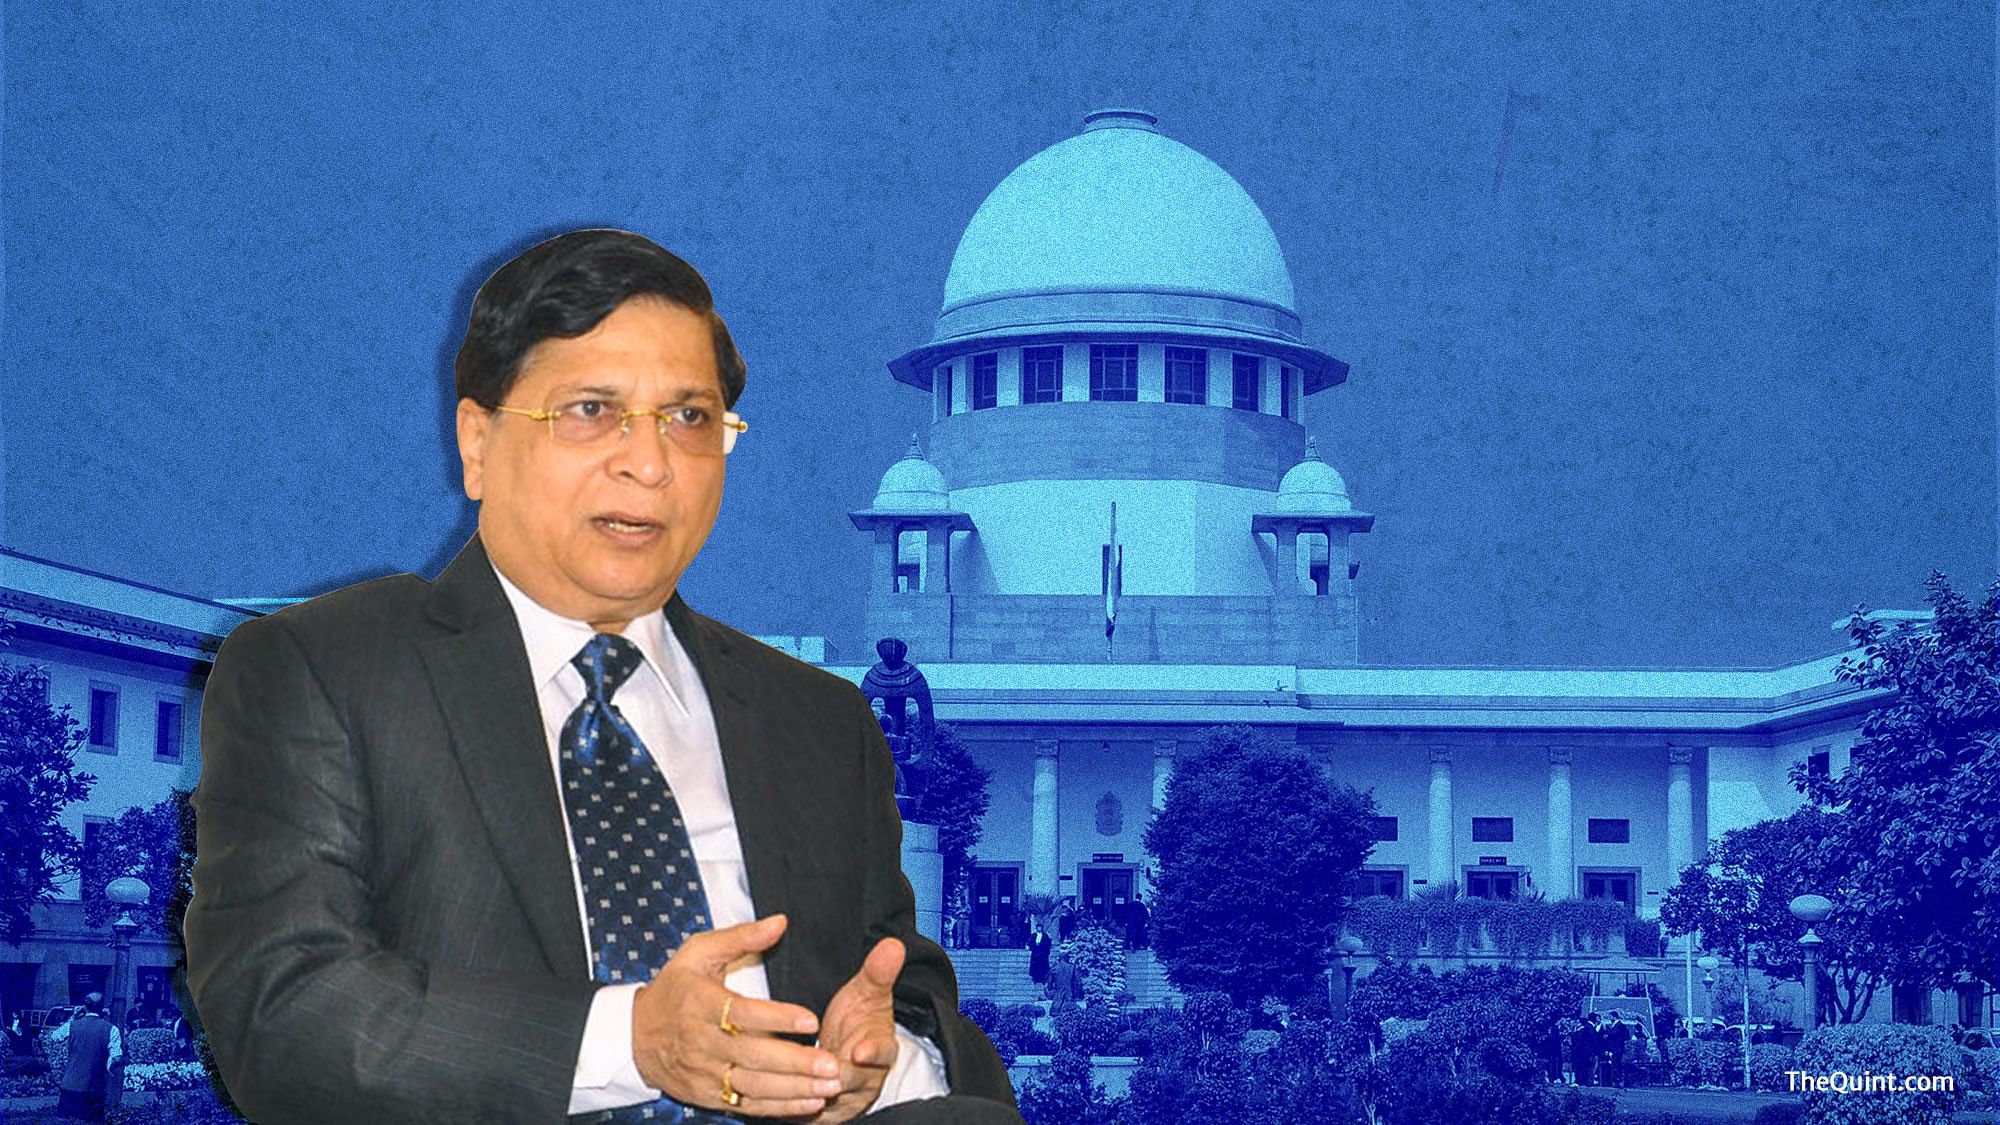 The Congress and other opposition parties are reportedly going to initiate proceedings to remove Chief Justice of India Dipak Misra from his office.